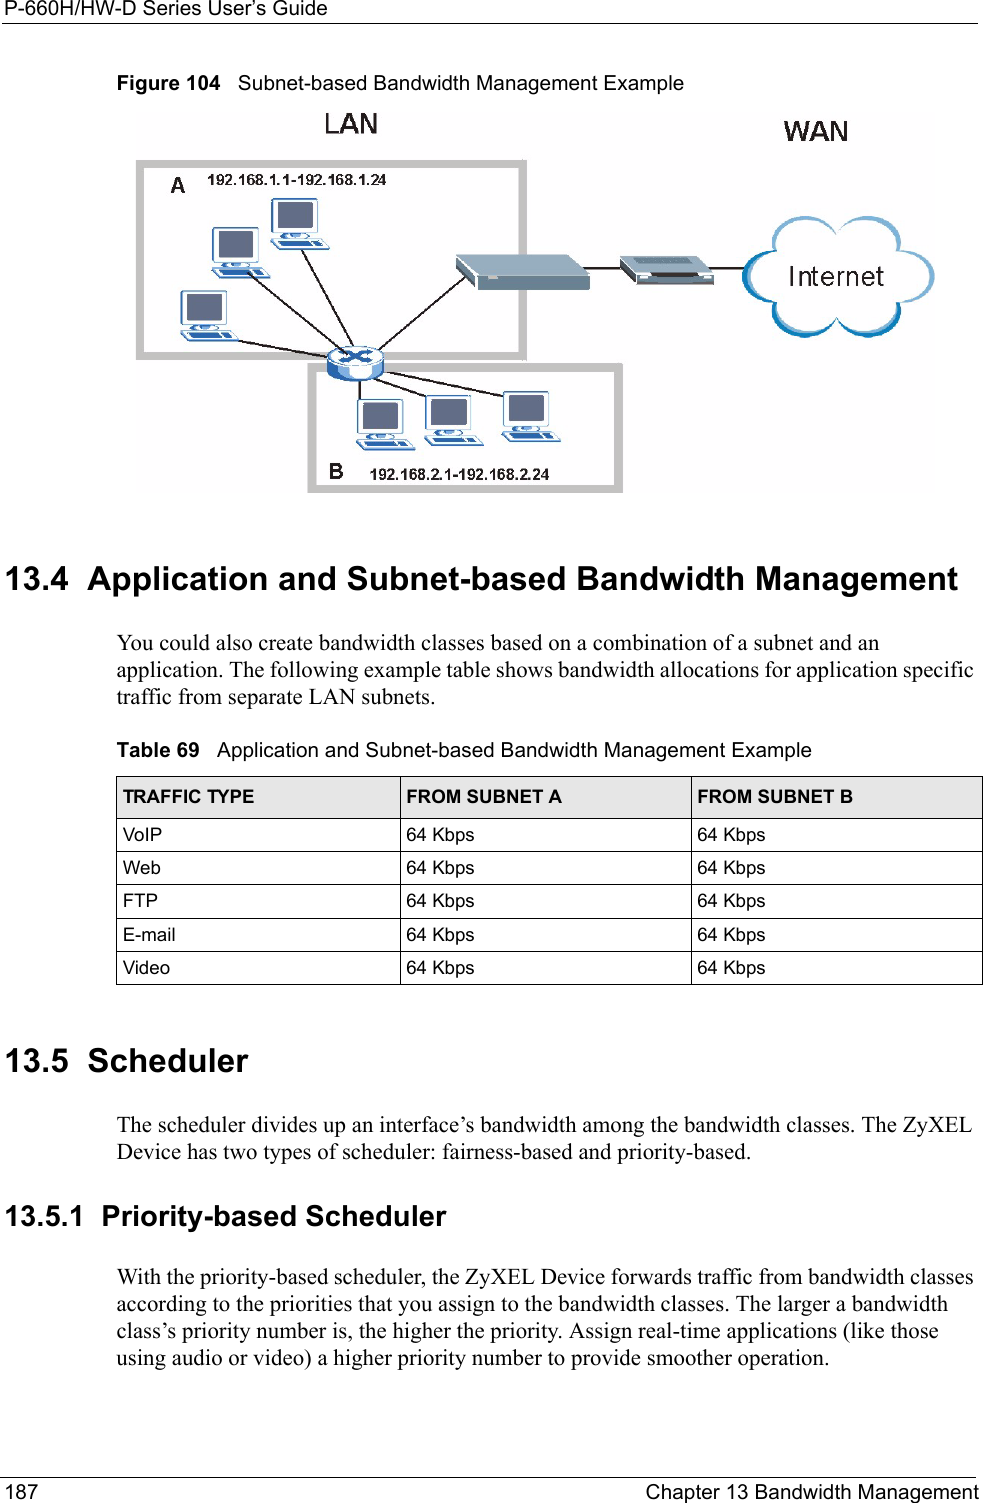 P-660H/HW-D Series User’s Guide187 Chapter 13 Bandwidth ManagementFigure 104   Subnet-based Bandwidth Management Example13.4  Application and Subnet-based Bandwidth ManagementYou could also create bandwidth classes based on a combination of a subnet and an application. The following example table shows bandwidth allocations for application specific traffic from separate LAN subnets.13.5  SchedulerThe scheduler divides up an interface’s bandwidth among the bandwidth classes. The ZyXEL Device has two types of scheduler: fairness-based and priority-based. 13.5.1  Priority-based SchedulerWith the priority-based scheduler, the ZyXEL Device forwards traffic from bandwidth classes according to the priorities that you assign to the bandwidth classes. The larger a bandwidth class’s priority number is, the higher the priority. Assign real-time applications (like those using audio or video) a higher priority number to provide smoother operation.Table 69   Application and Subnet-based Bandwidth Management Example TRAFFIC TYPE FROM SUBNET A FROM SUBNET BVoIP 64 Kbps 64 KbpsWeb 64 Kbps 64 KbpsFTP 64 Kbps 64 KbpsE-mail 64 Kbps 64 KbpsVideo 64 Kbps 64 Kbps